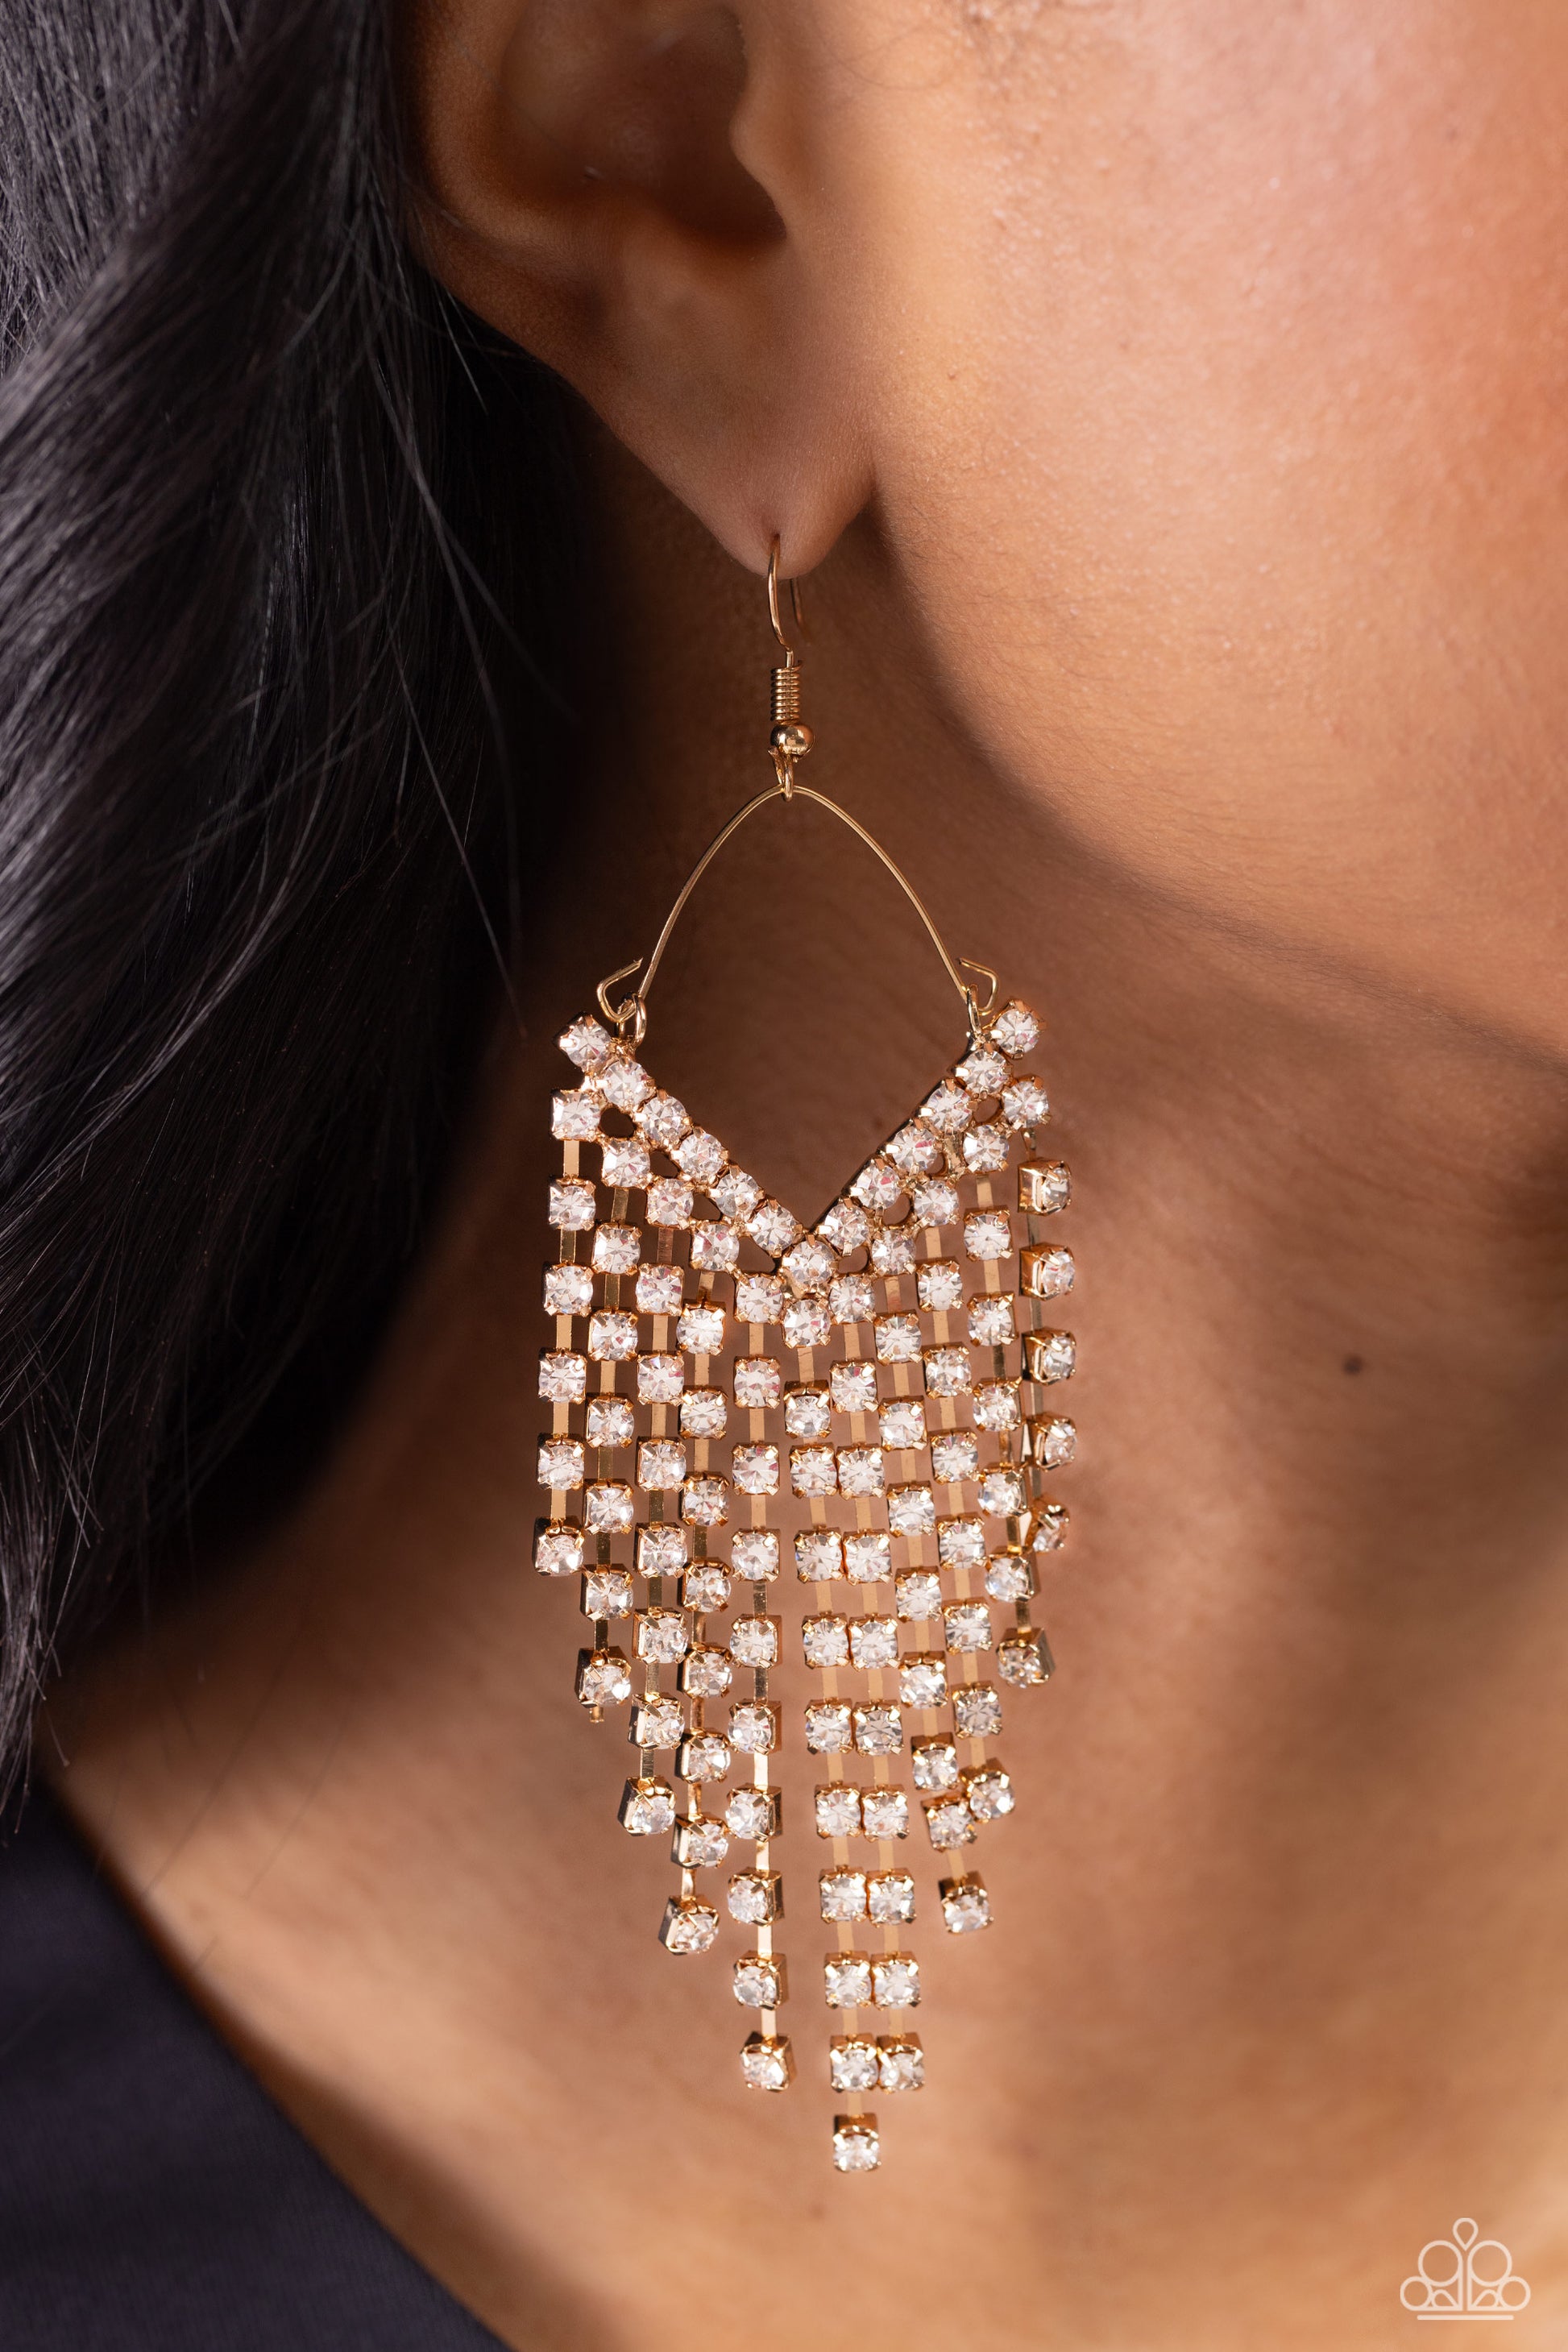 Paparazzi Accessories - V Fallin - Gold Earrings attached to a dainty gold wire fitting, strands of glittery white rhinestones pressed in sleek gold fittings freefall from the ear into an edgy v-shaped cascade for a bold look. Earring attaches to a standard fishhook fitting.  Sold as one pair of earrings.